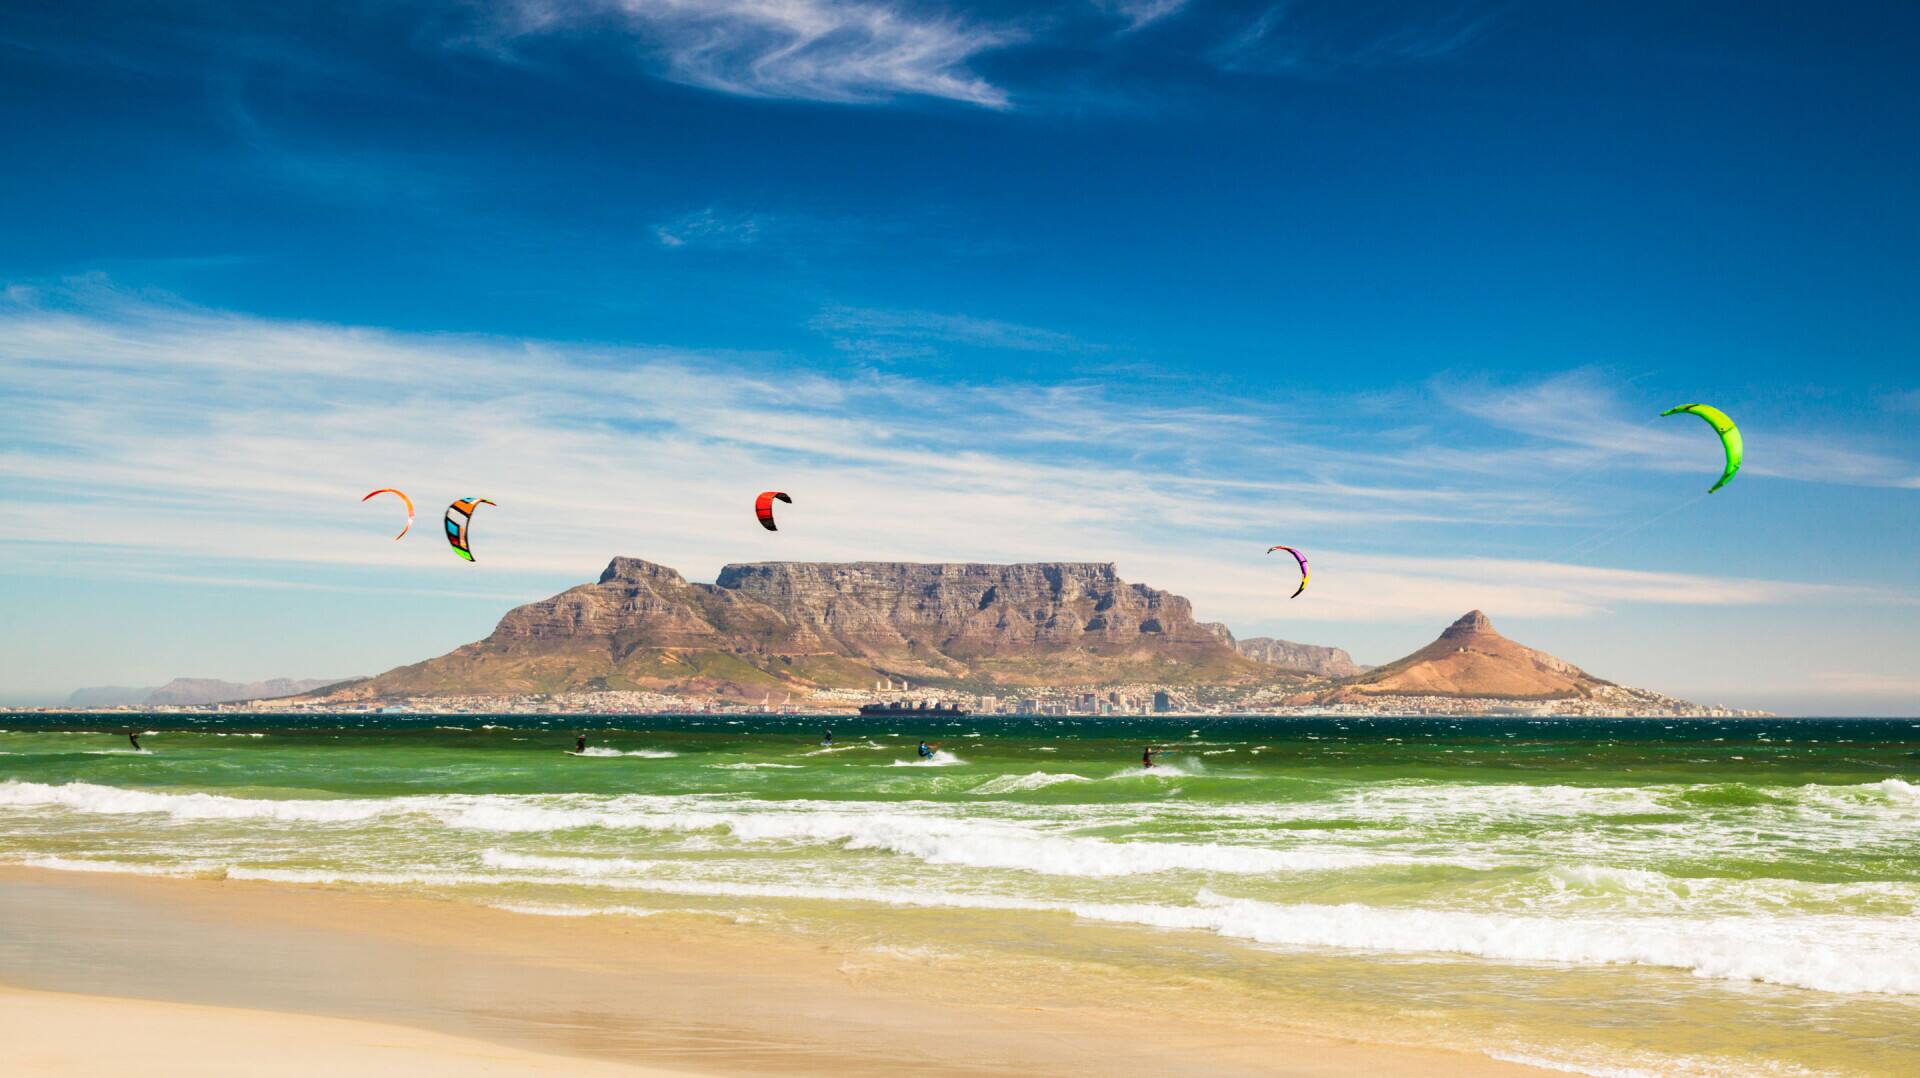 Cape Town's exhilarating kite-surfing spots